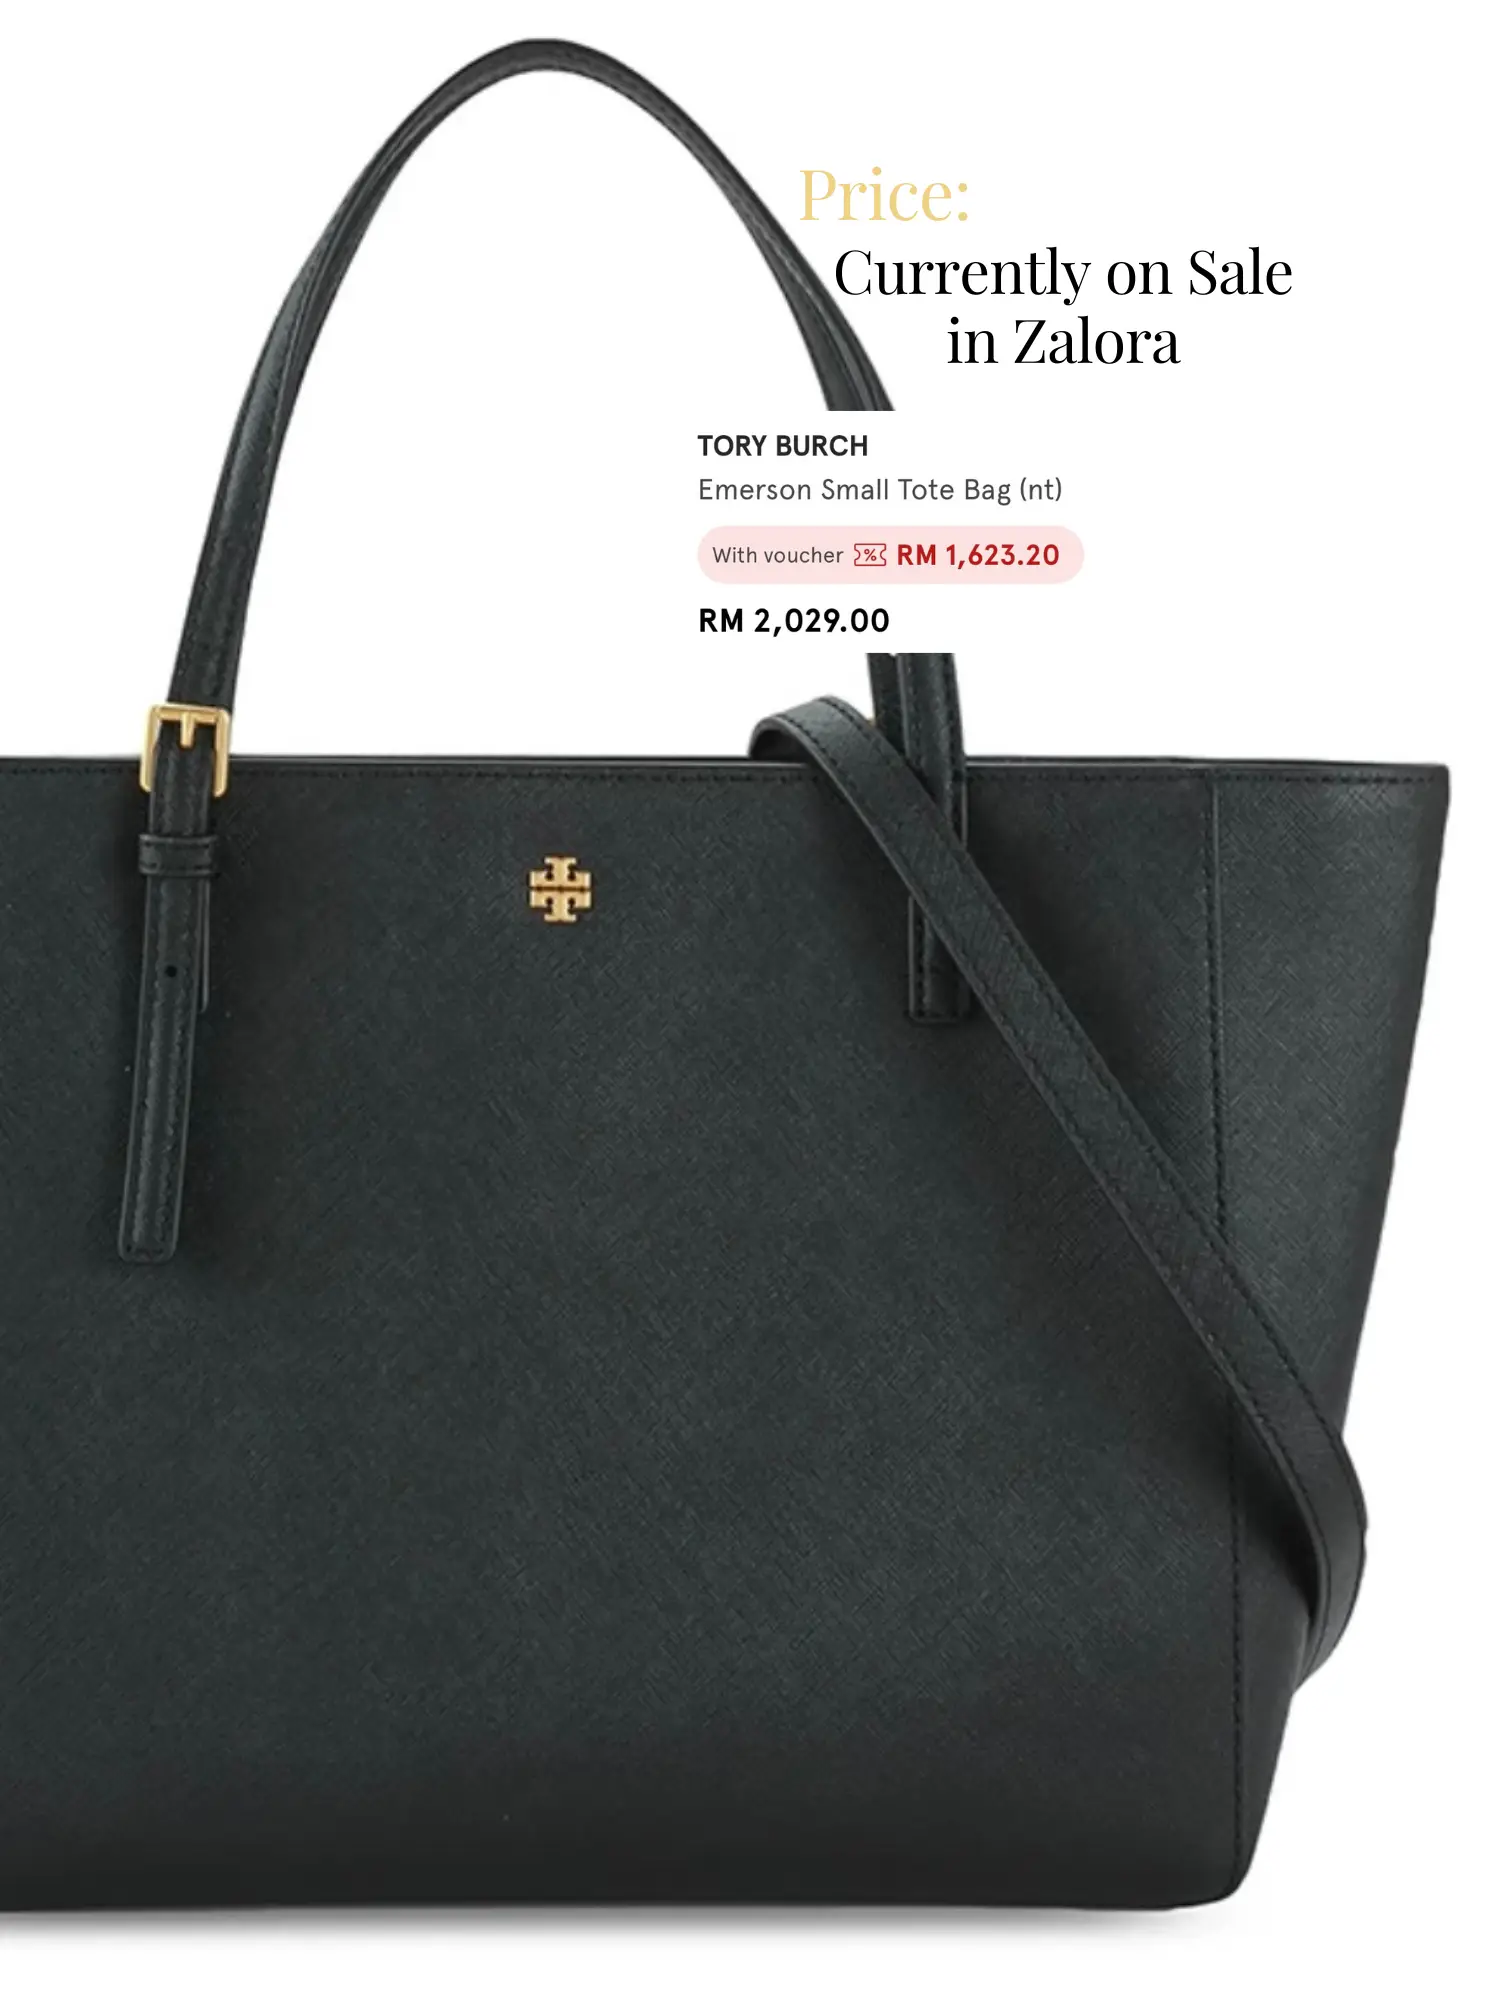  Tory Burch Women's Ever-Ready Small Tote, Black, One